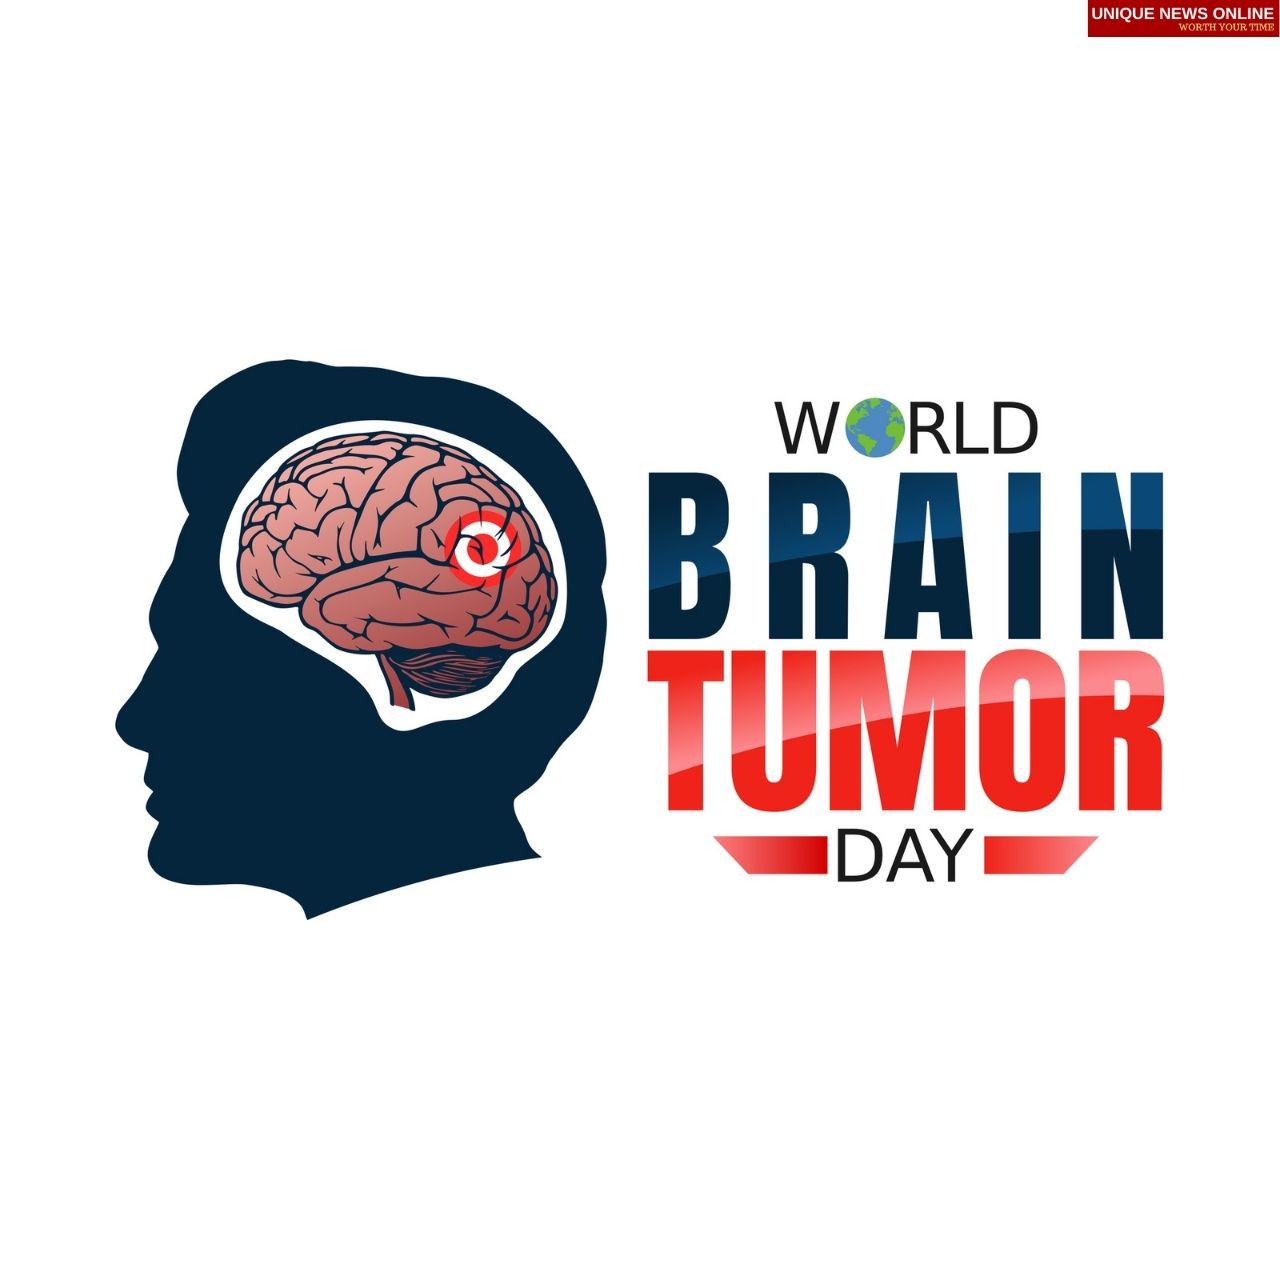 World Brain Tumor Day 2021 Theme, Quotes, and Messages to Aware people